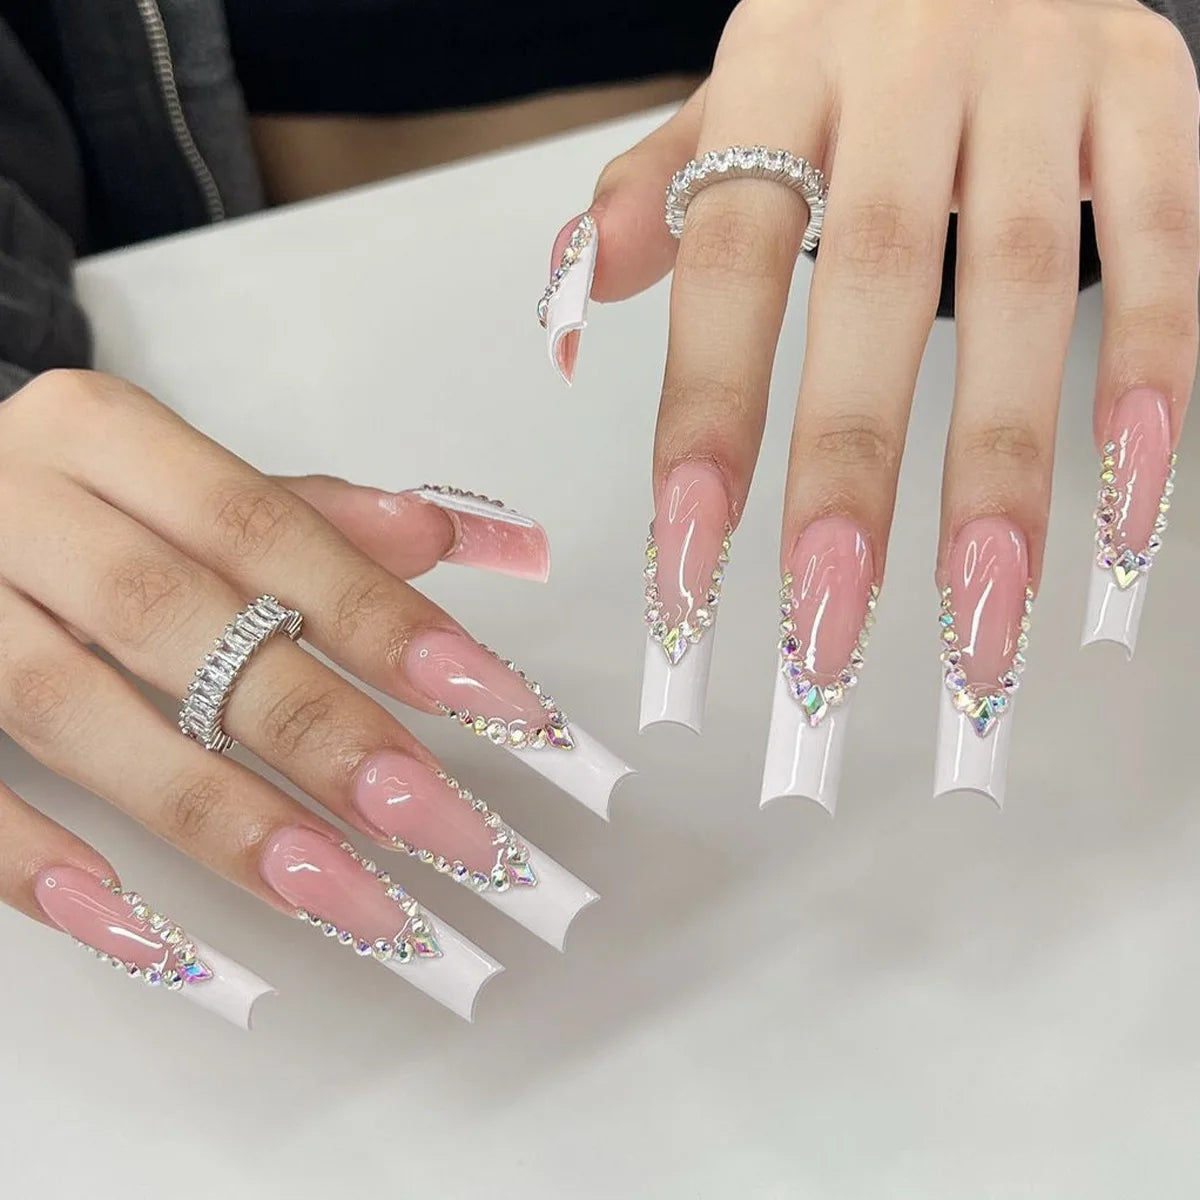 24Pcs Full Cover False Nails with Glue Long Square Coffin Fake Nails French Detachable Ballet Love Pattern Design Press on Nails